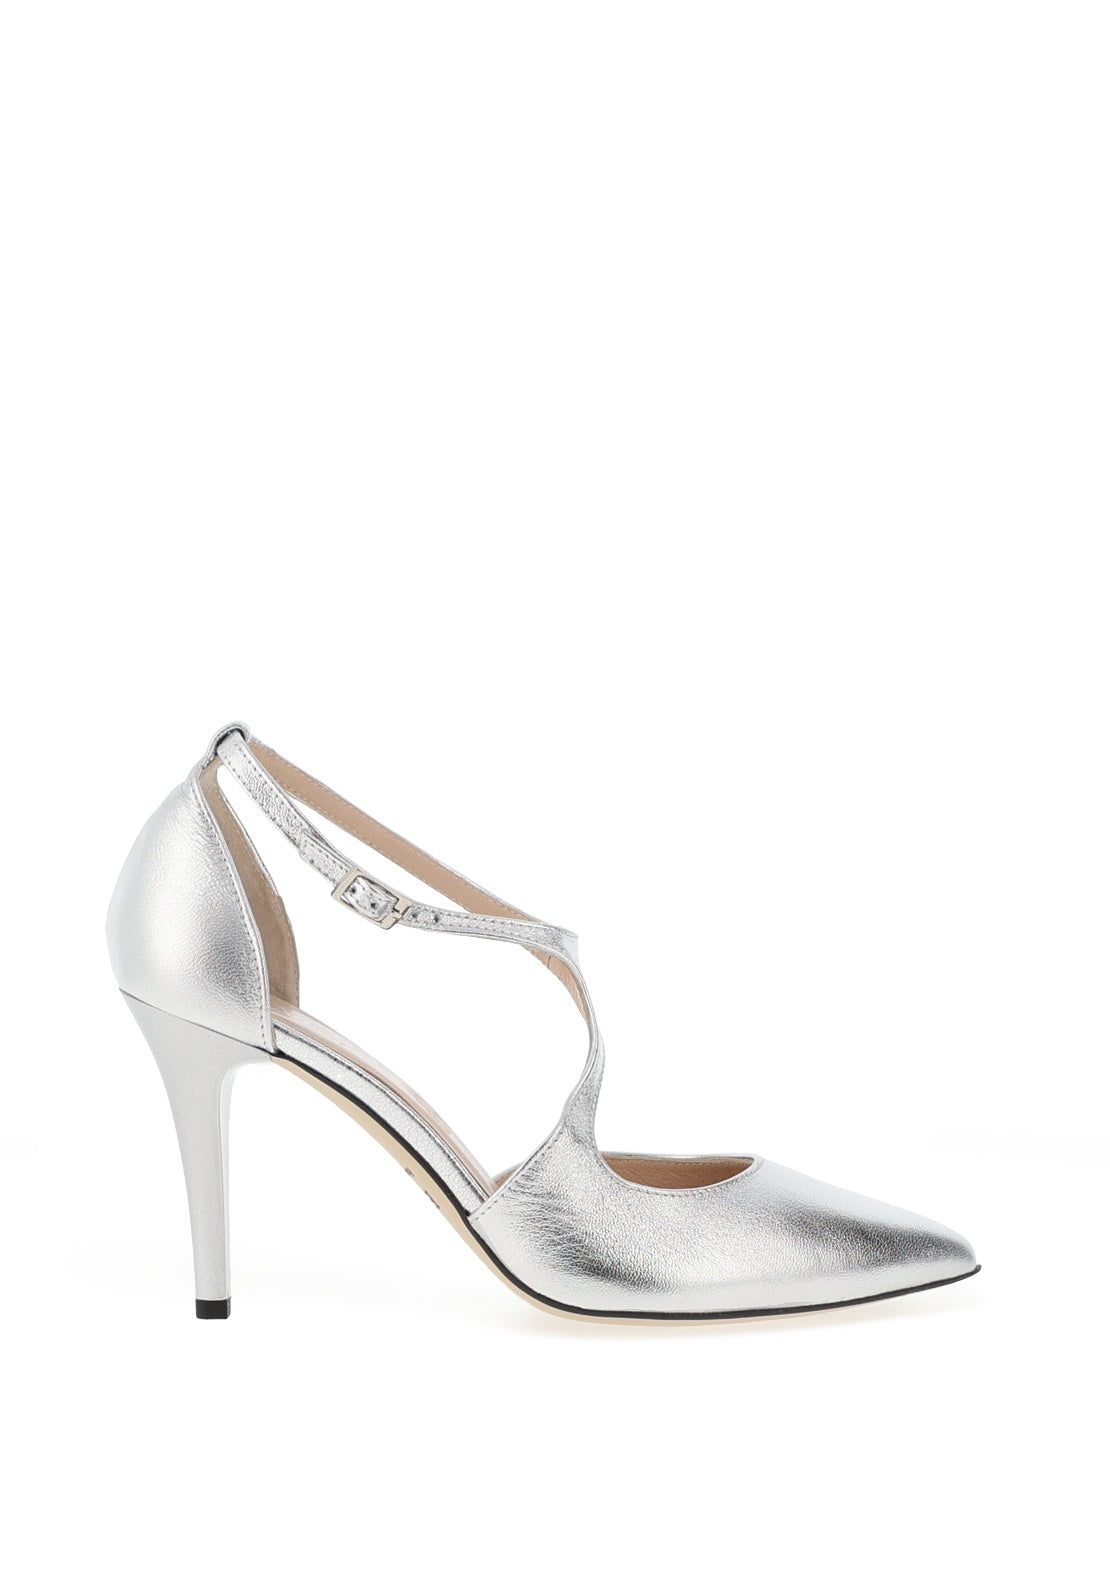 Emis Leather Wrap High Heeled Shoes, Silver - McElhinneys